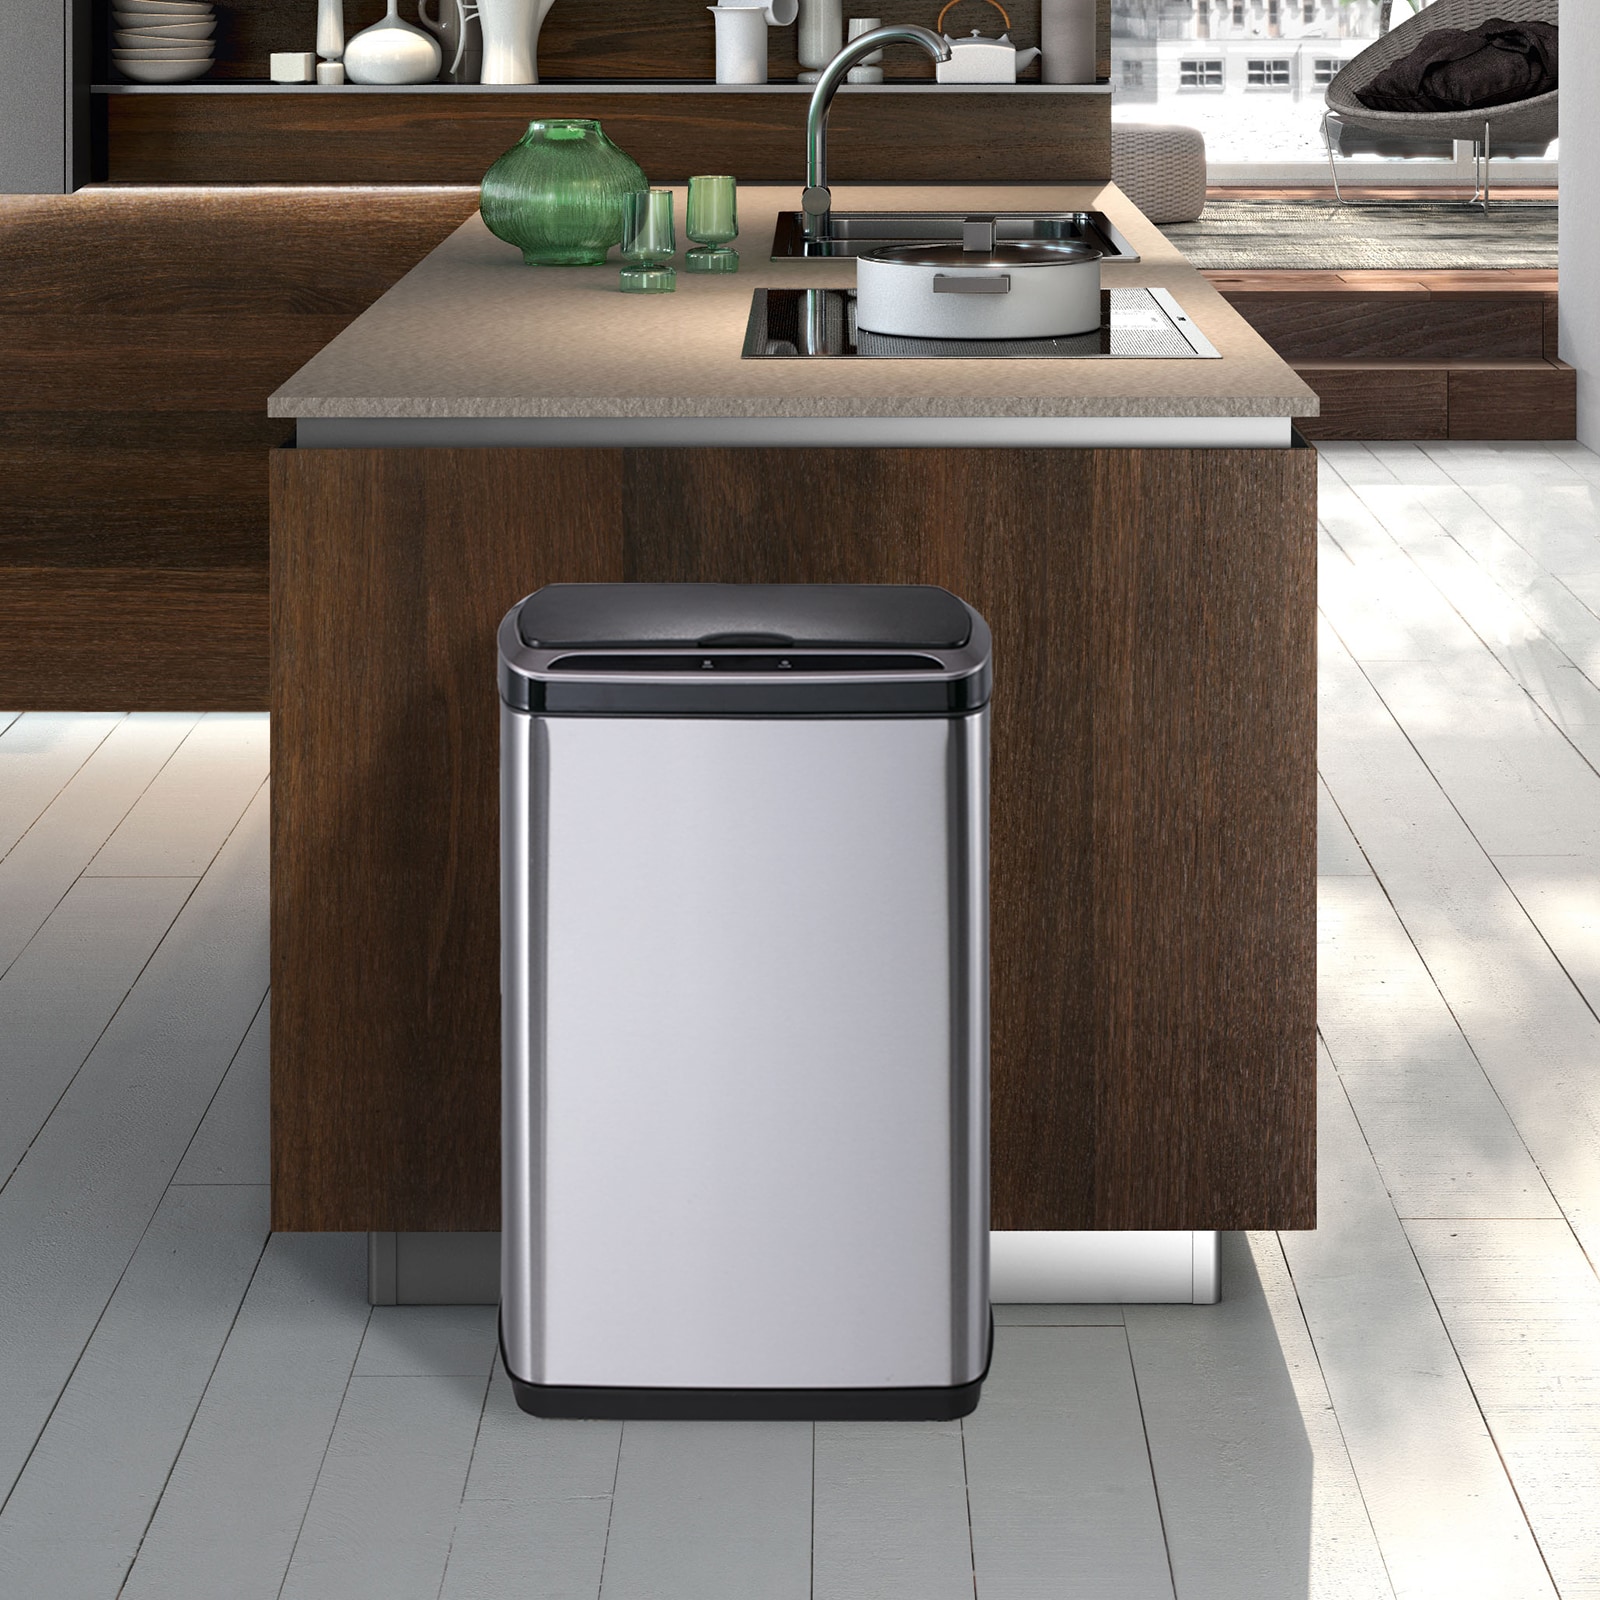 SANIWISE Automatic Sensor Trash Can with Lid 50 Liter/13 Gallon